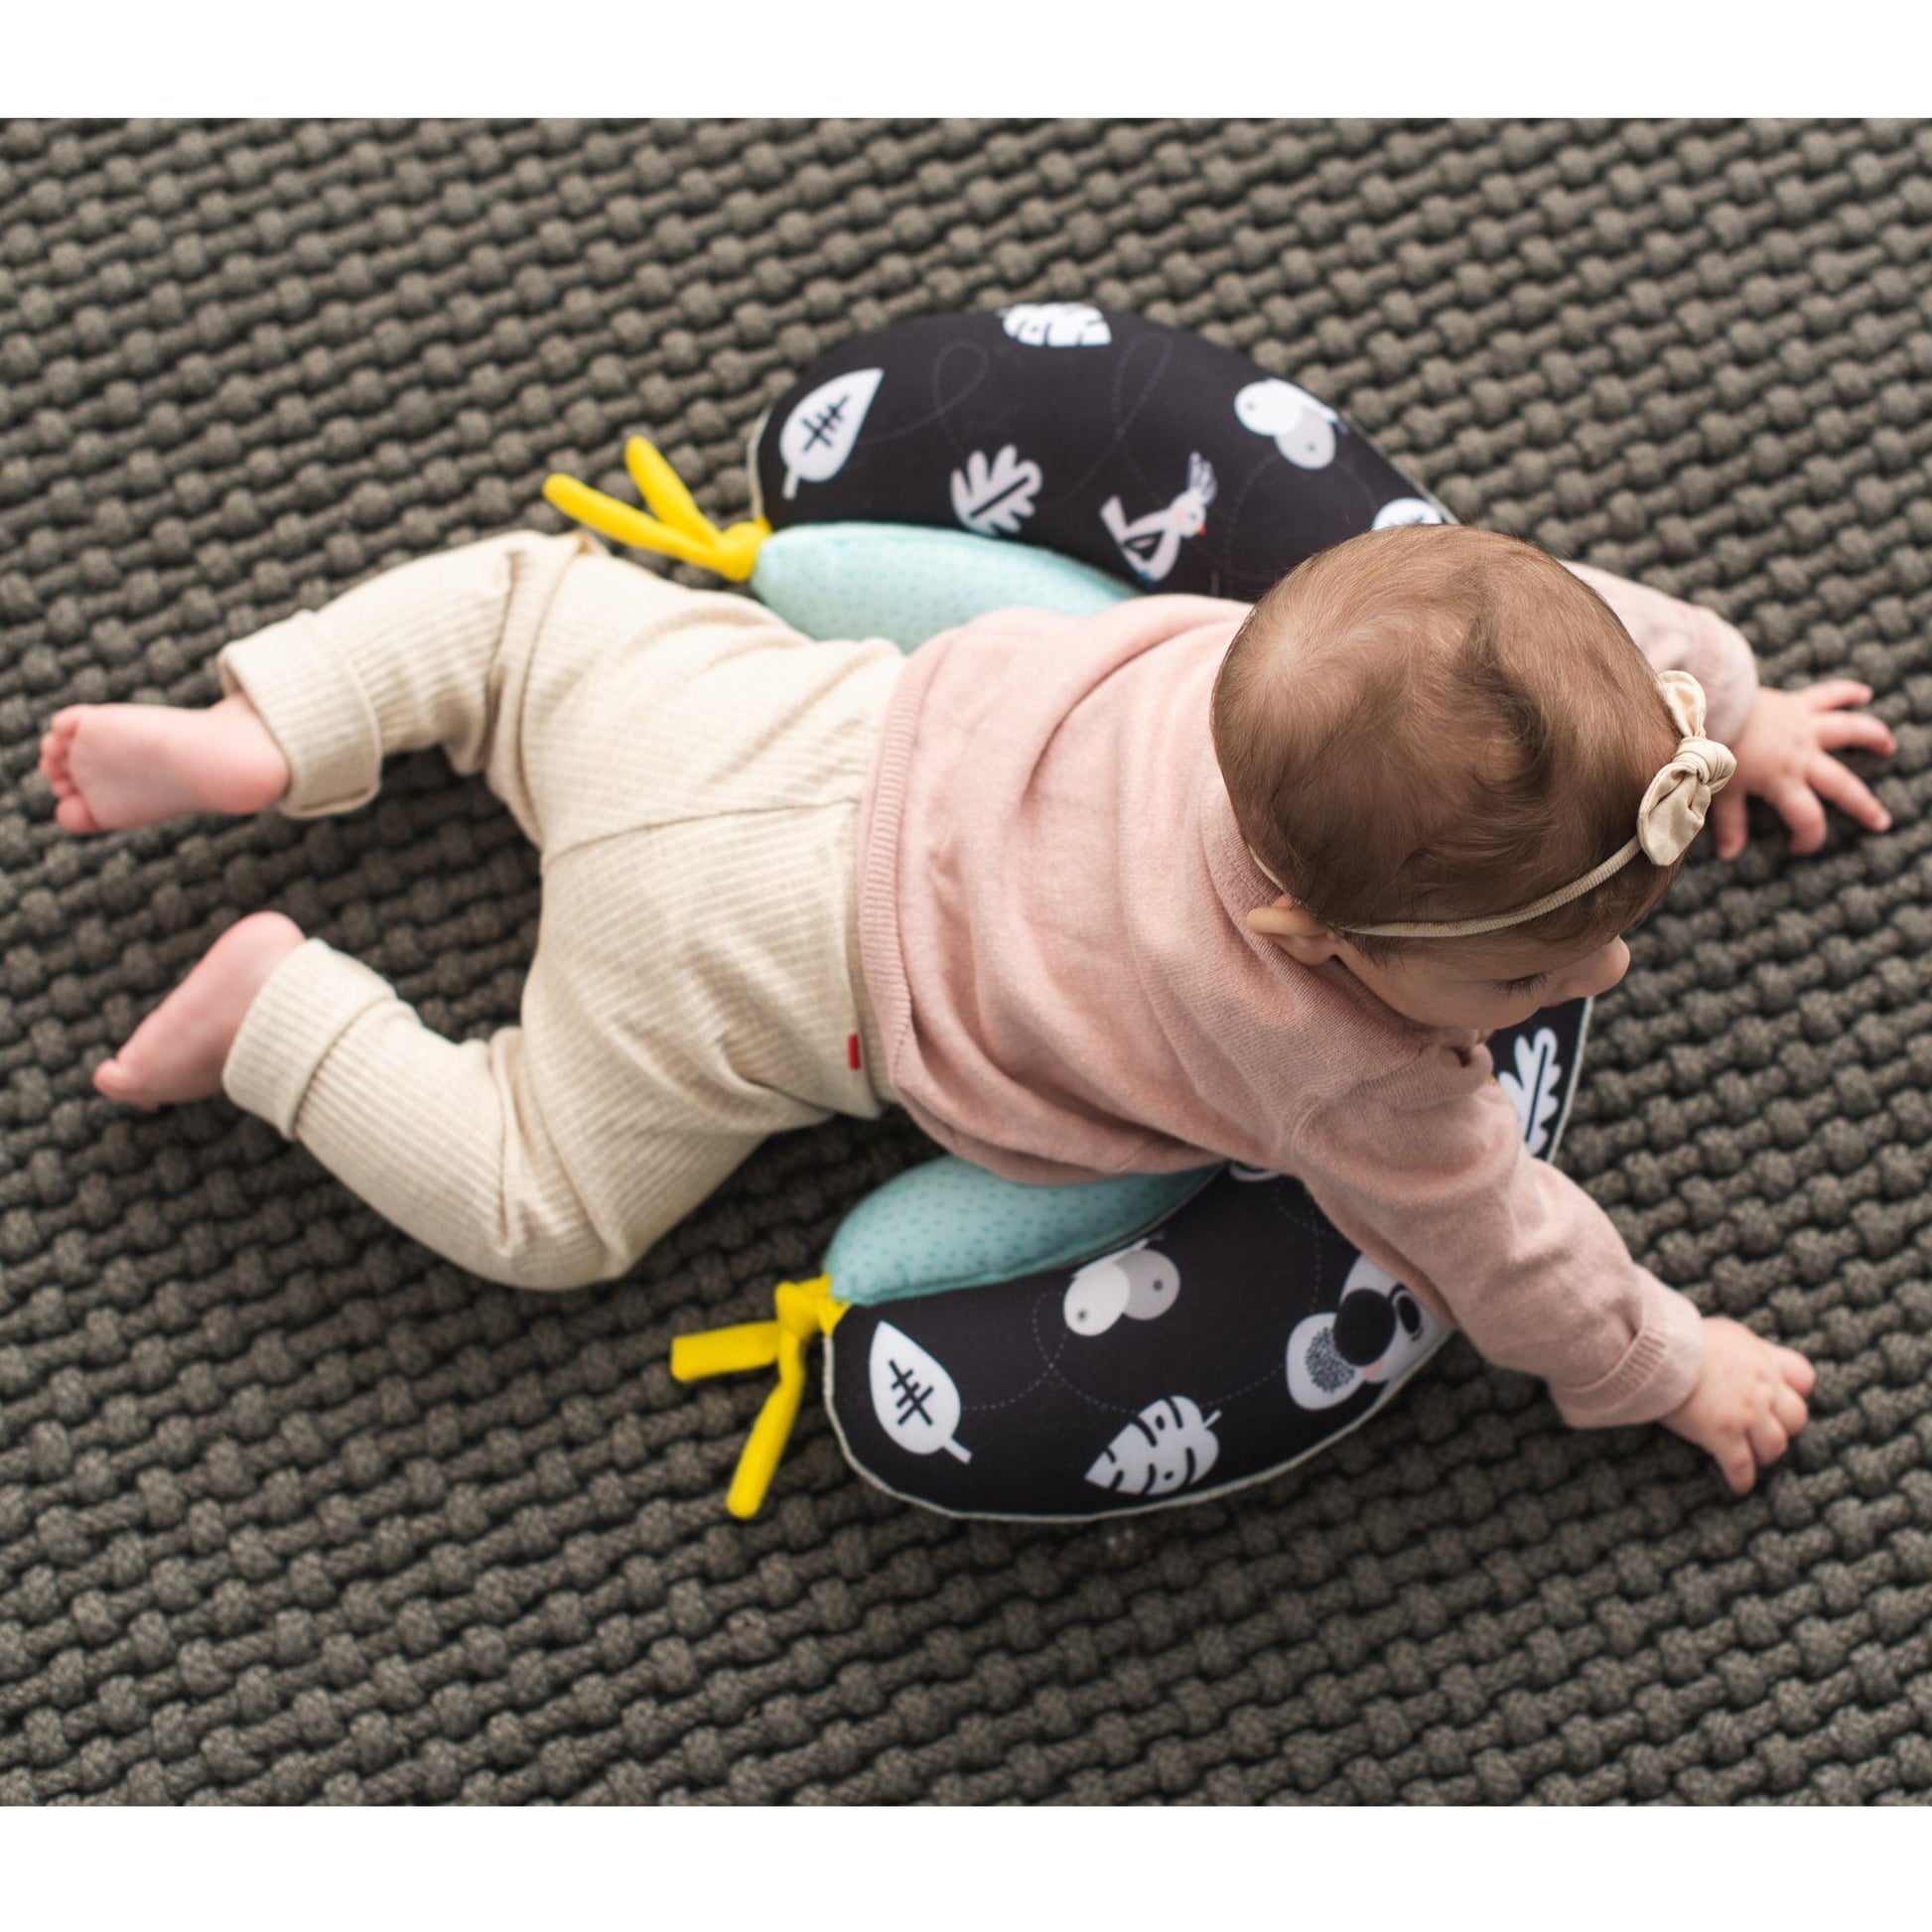 Taf Toys 2 in 1 Tummy Time Pillow | Little Baby.